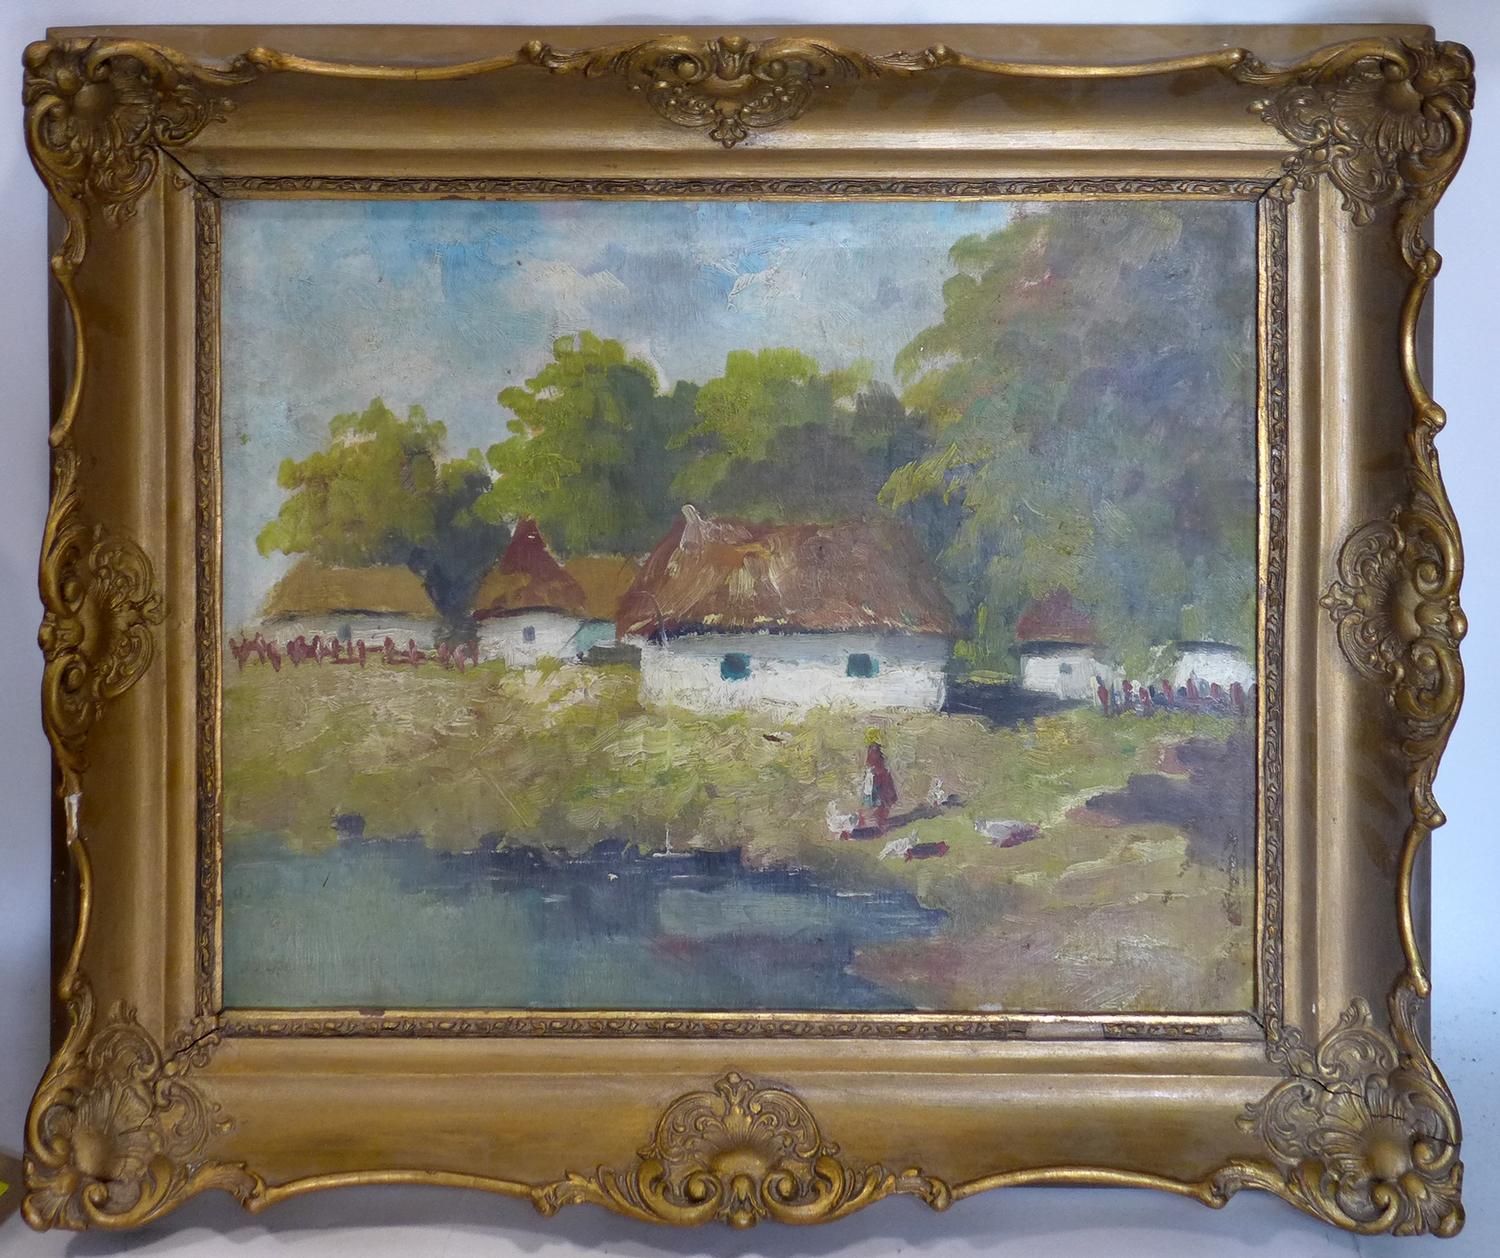 A 20th century impressionist study of a figure by a river bed, oil on canvas, signed and set in gilt - Image 2 of 2